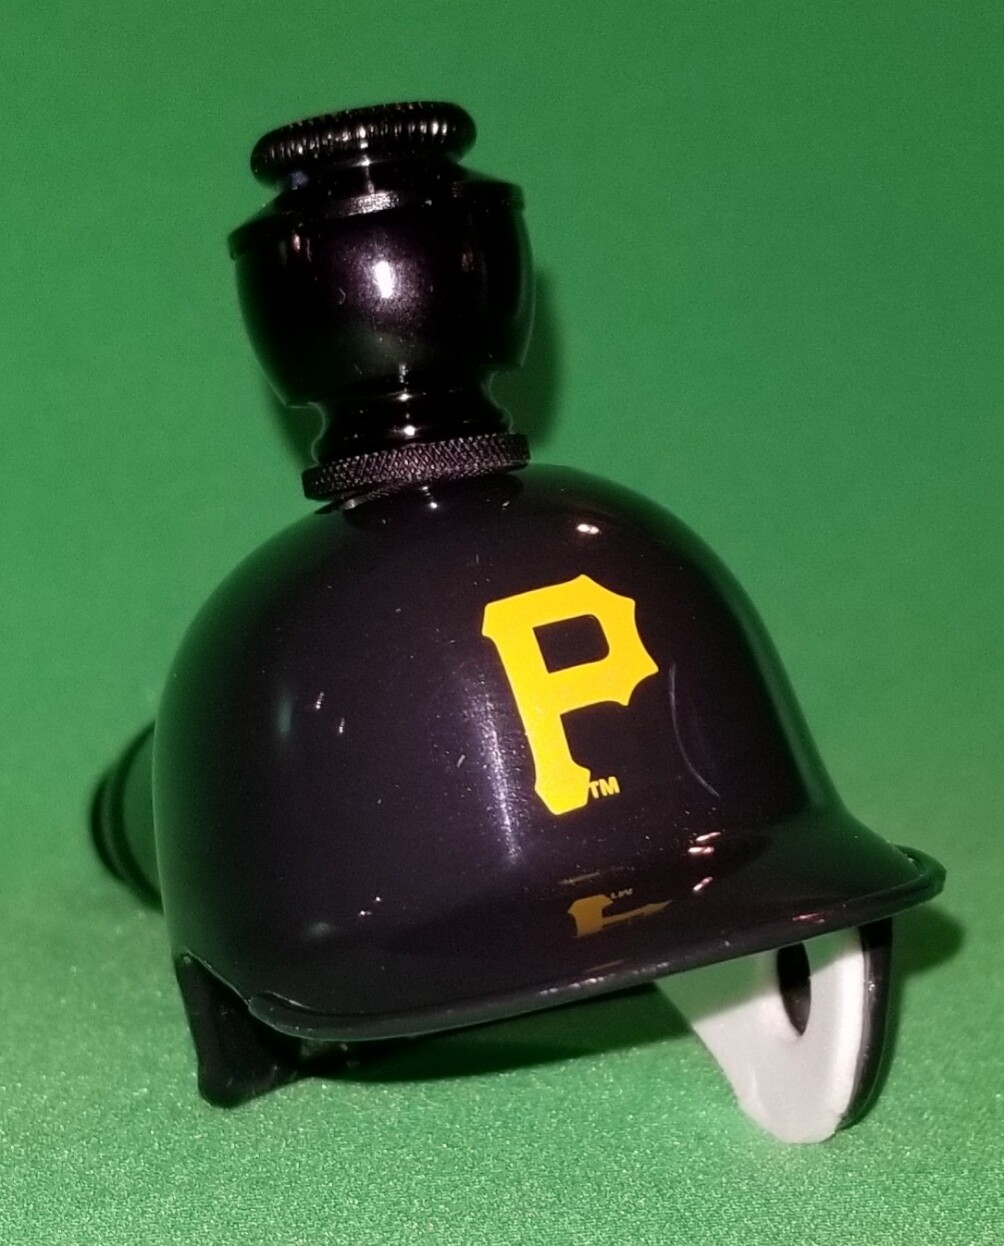 PITTSBURGH PIRATES "BAD ASS" BASEBALL PIPE Straight/Black Anodized